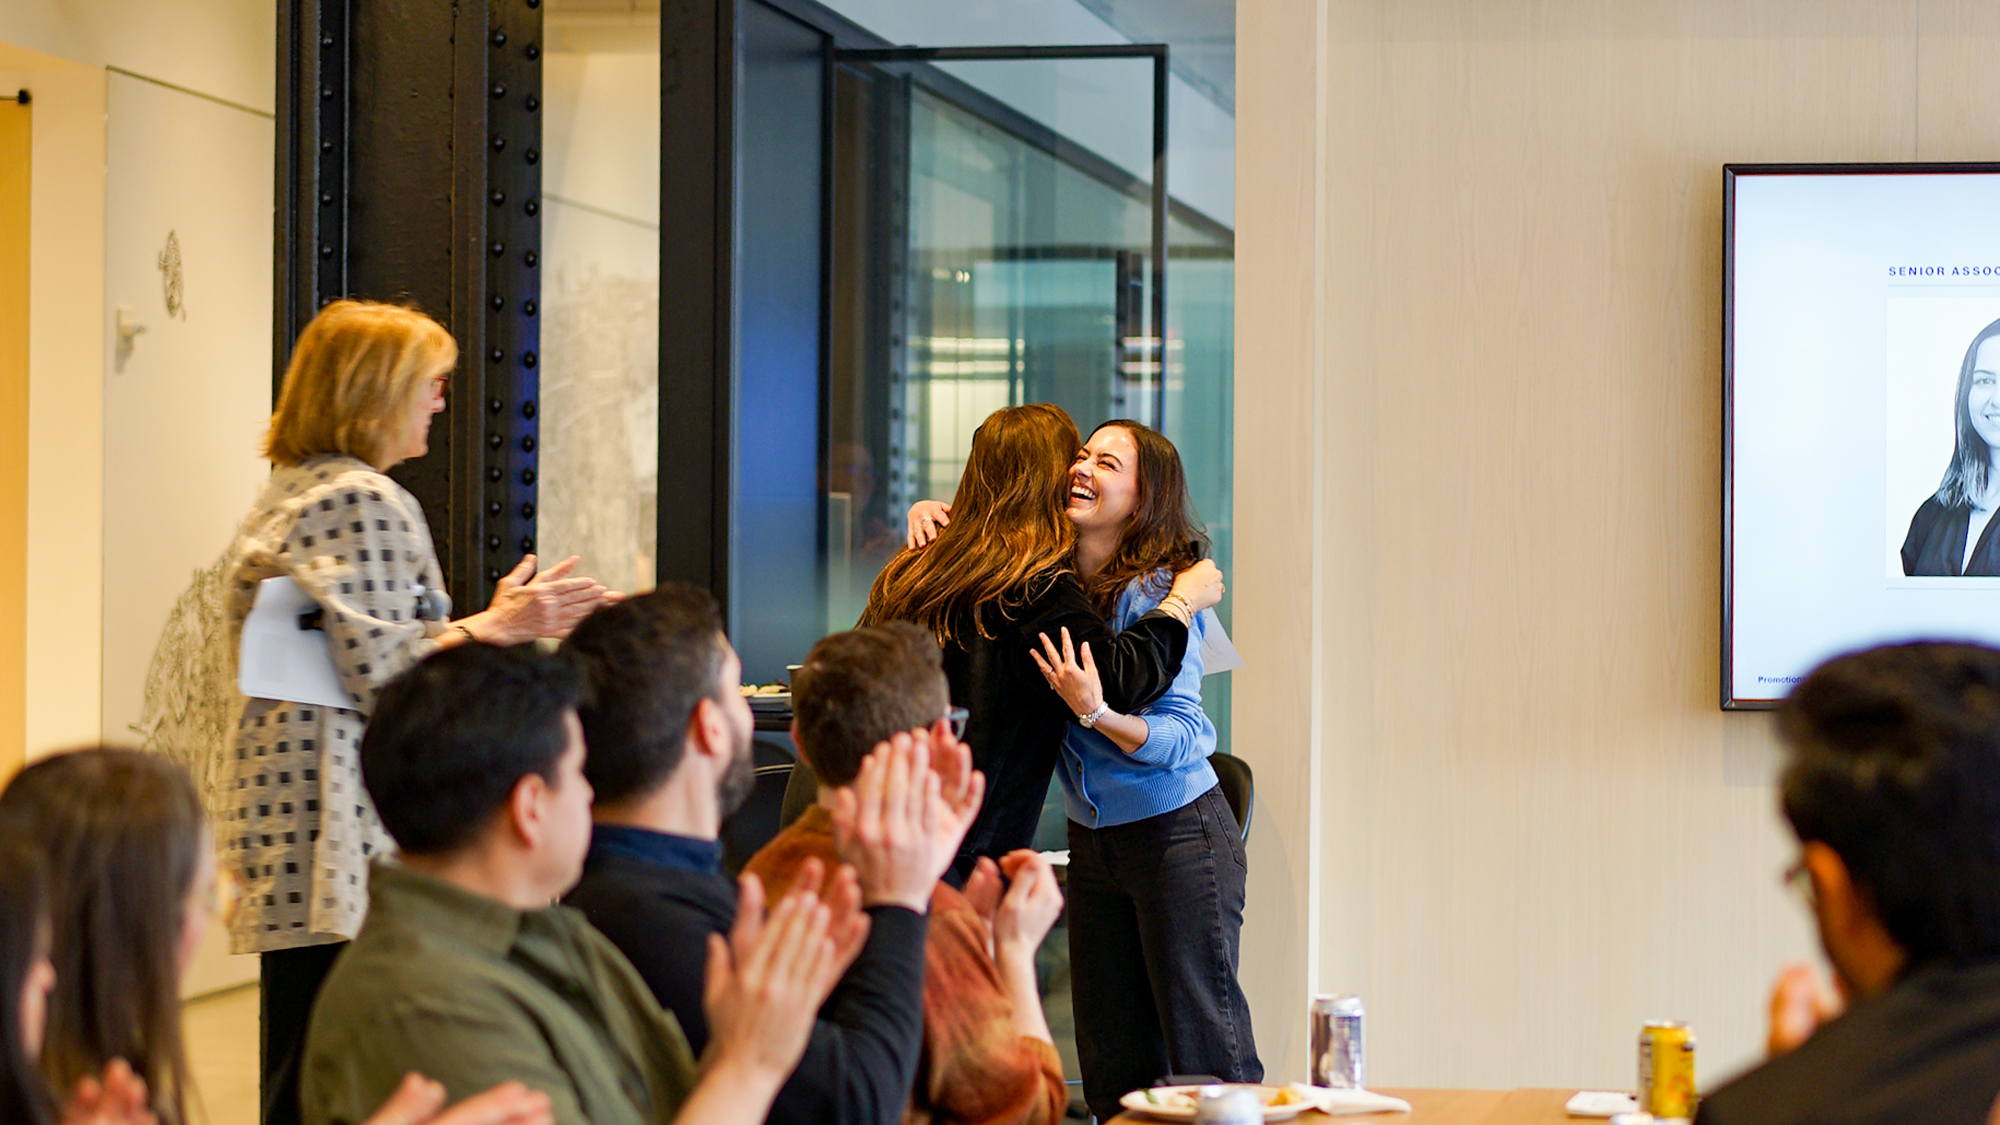 A joyous moment in a corporate office setting as two colleagues embrace in a congratulatory hug with a backdrop of applauding team members and a presentation screen, capturing the essence of professional recognition and team spirit.